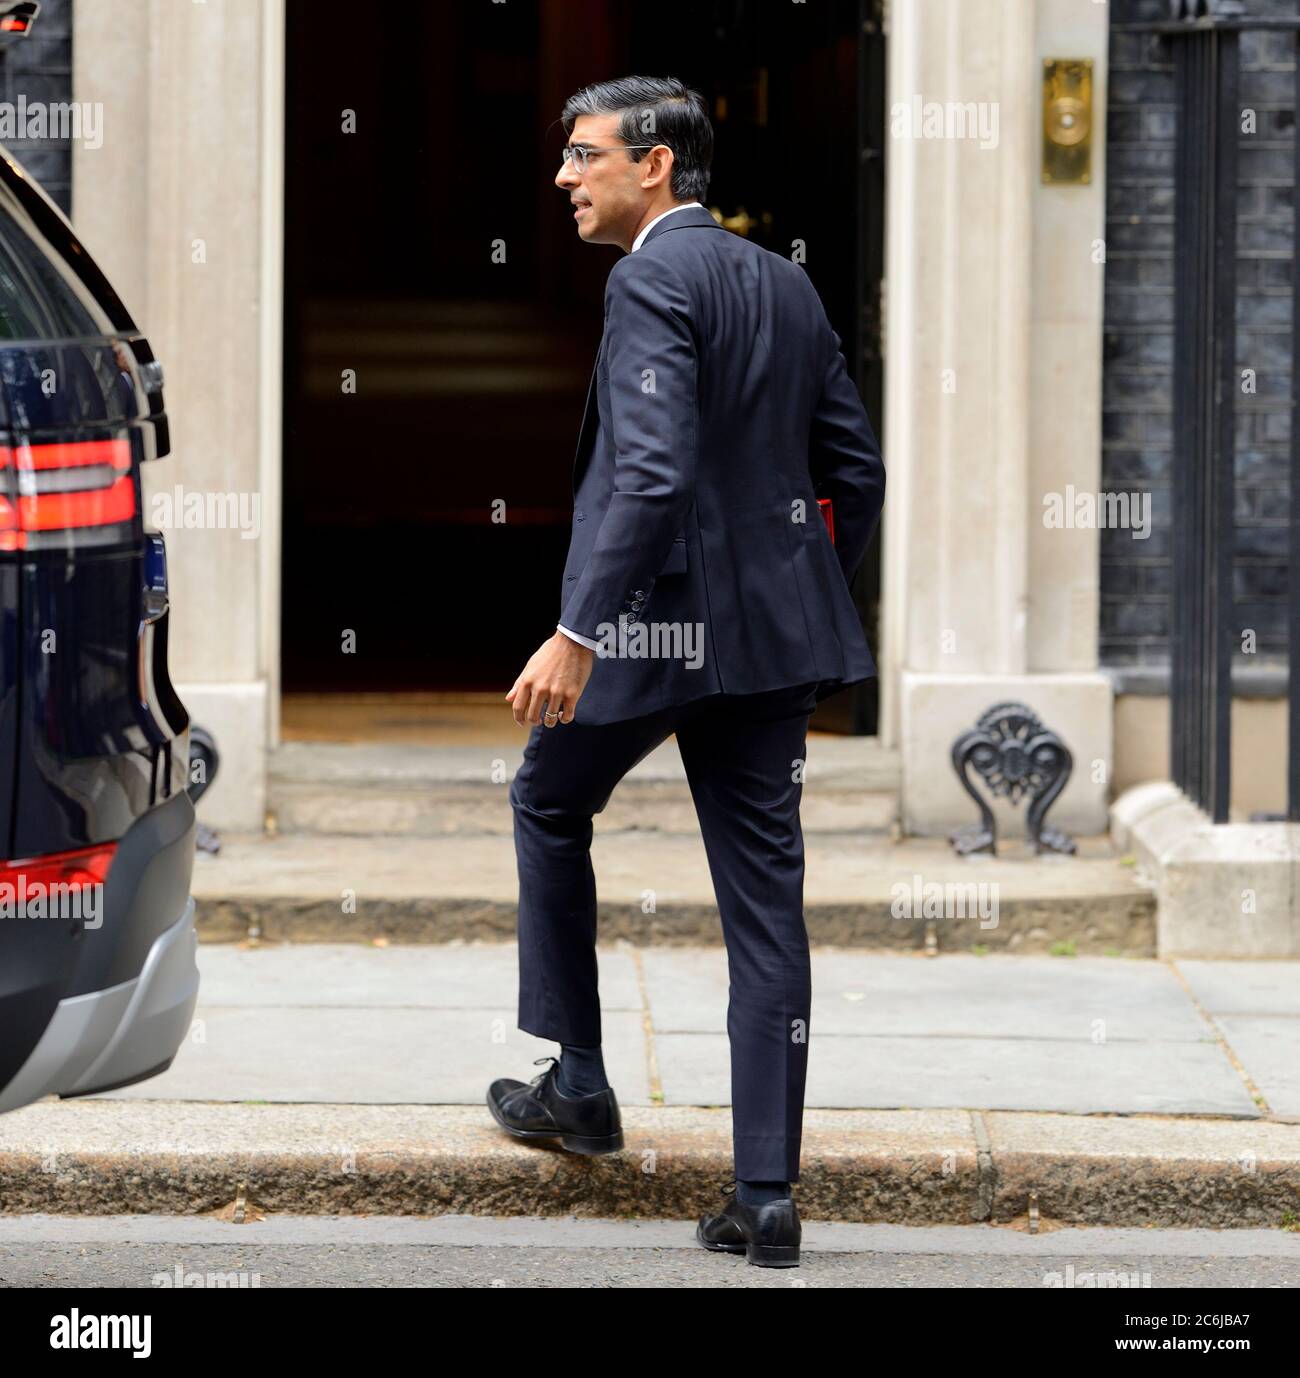 Rishi Sunak MP - Chancellor of the Exchequer - arriving in Downing Street after answering Treasury Questions in Parliament, 7th July 2020 Stock Photo